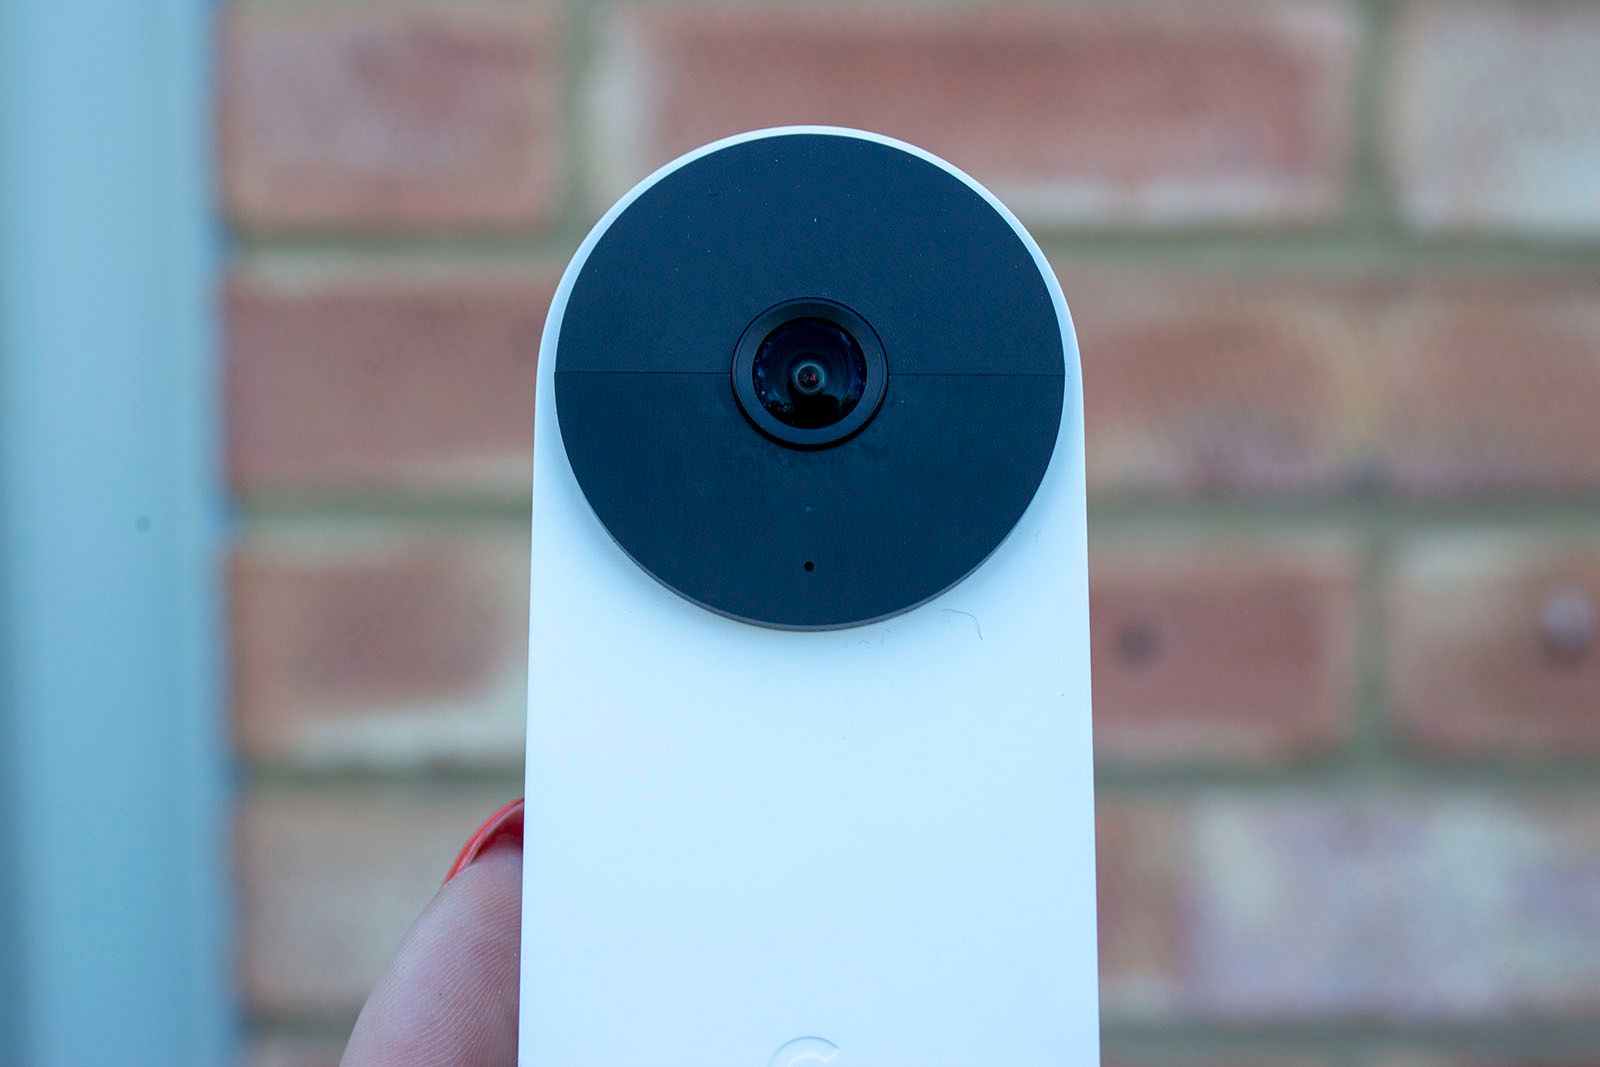 Google Nest Battery Doorbell review: A great Ring competitor photo 15